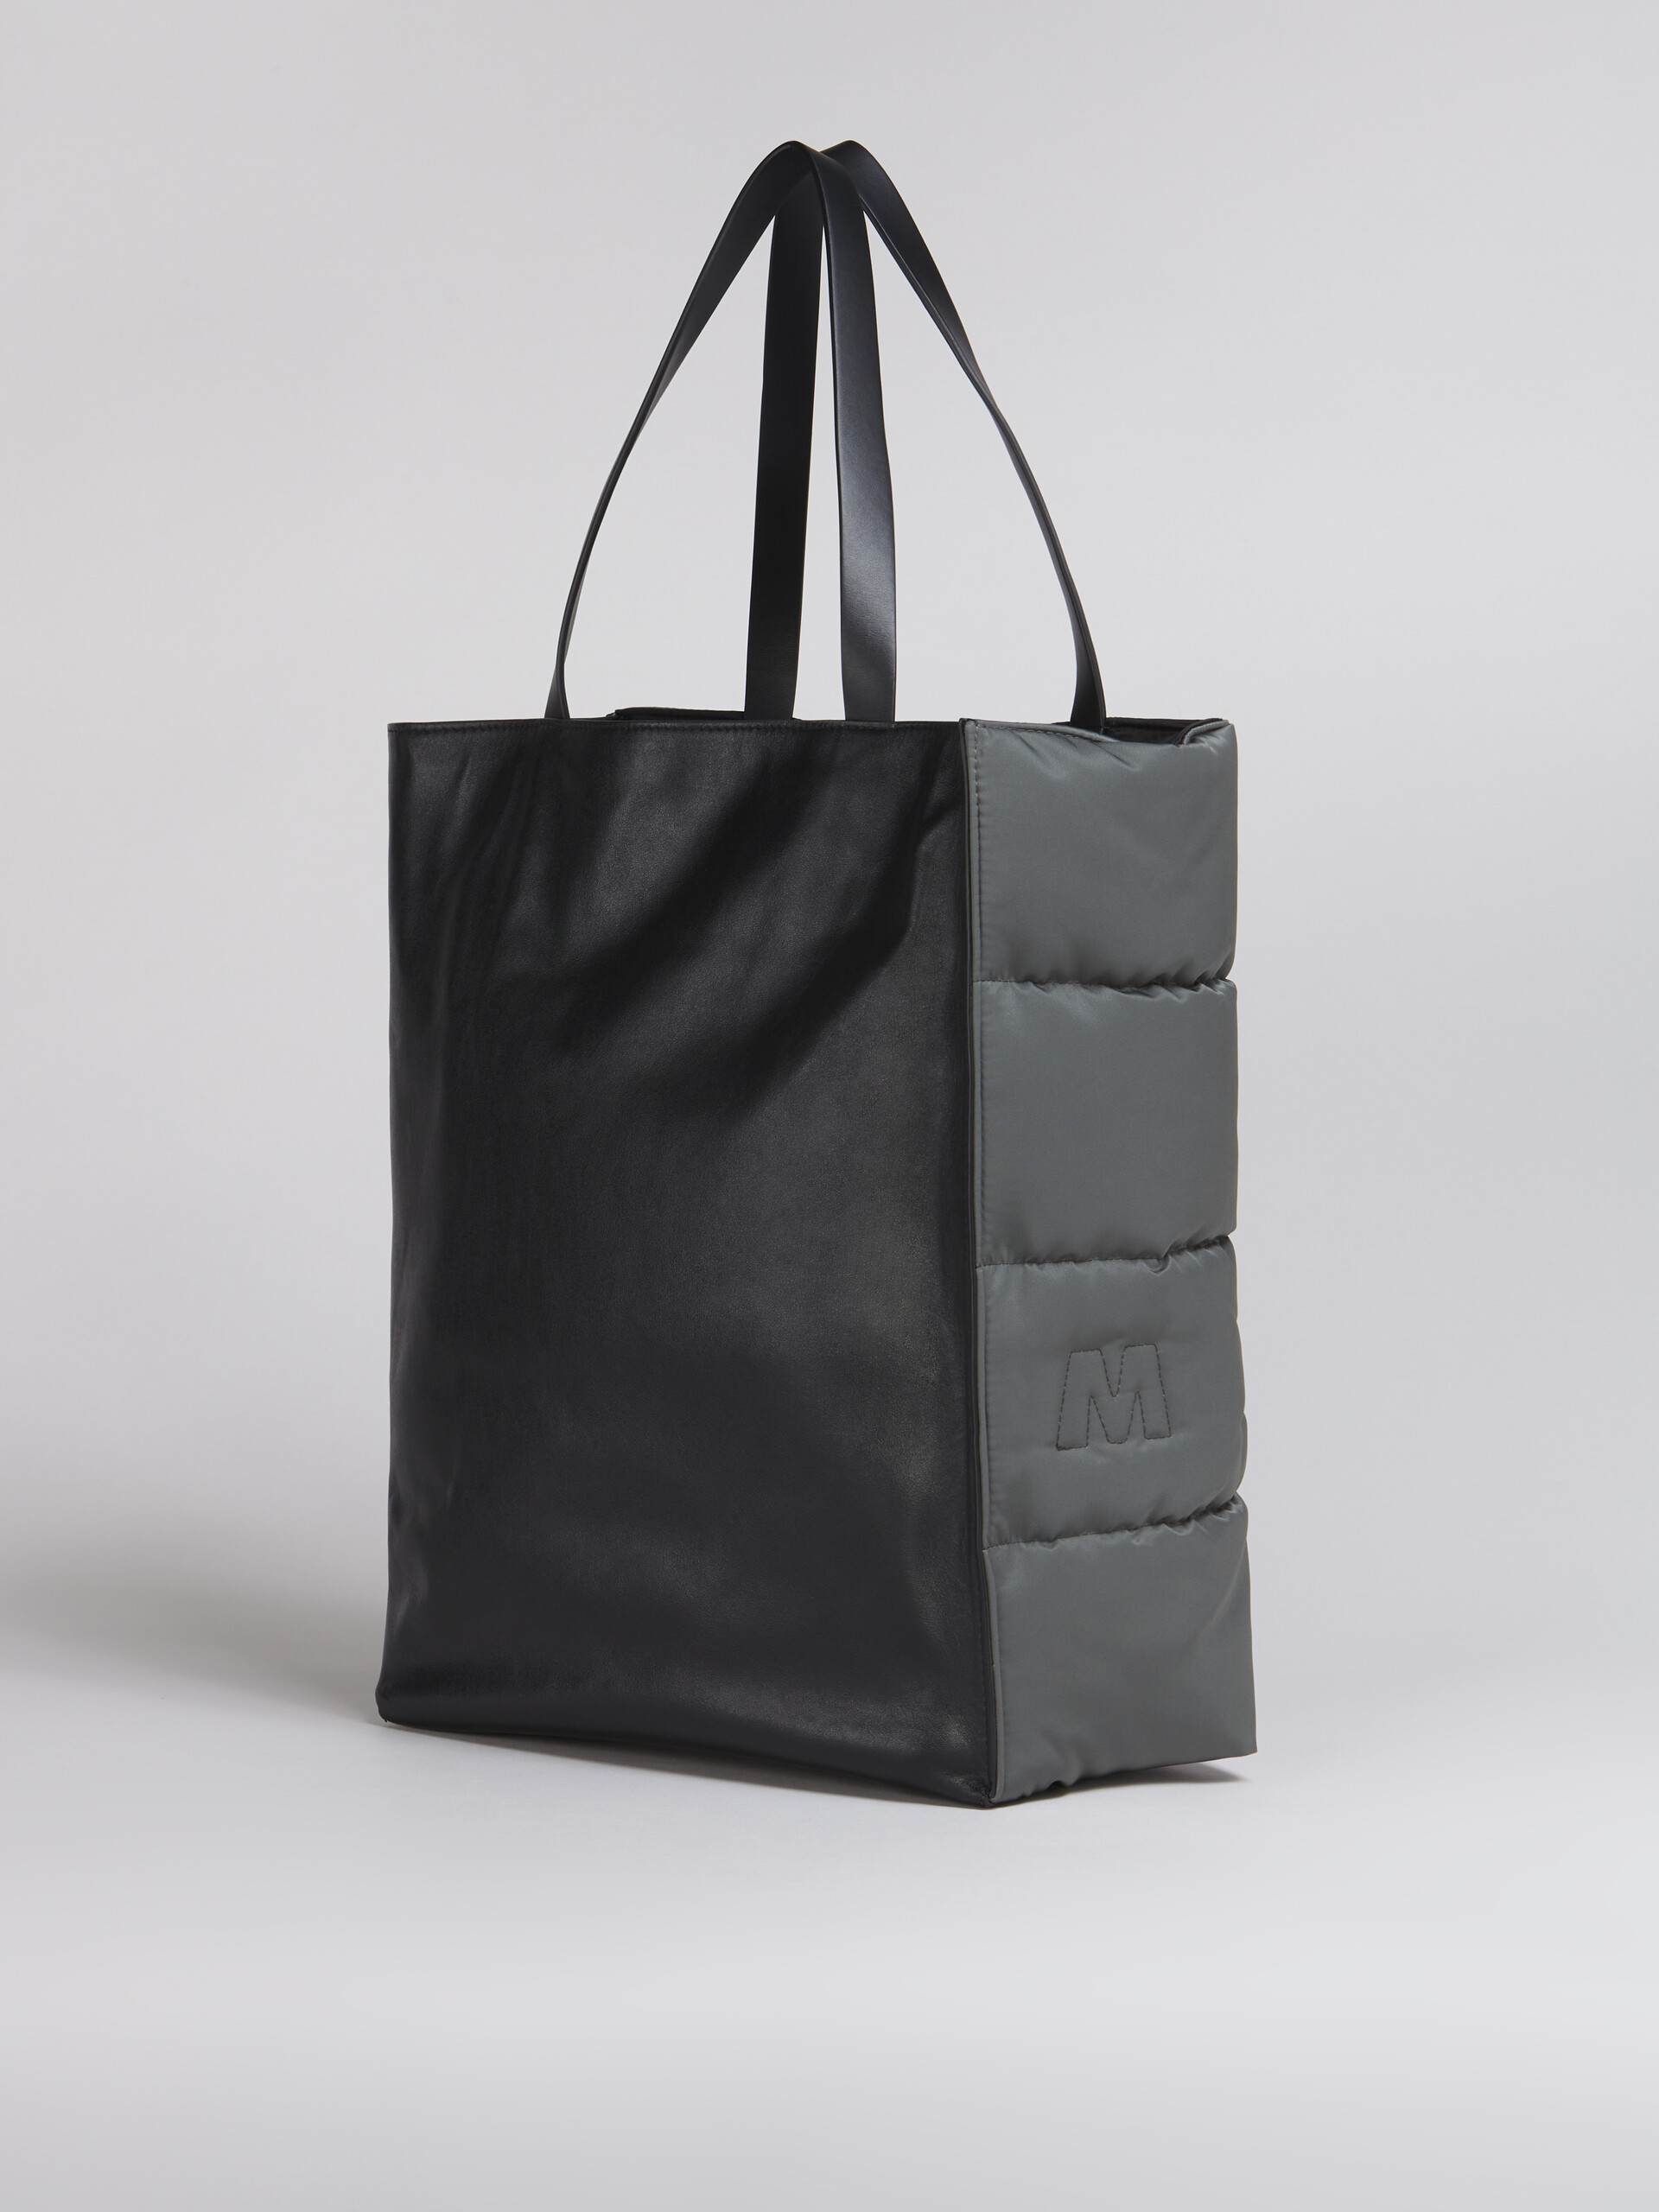 MUSEO tote bag in quilted nylon - Shopping Bags - Image 3